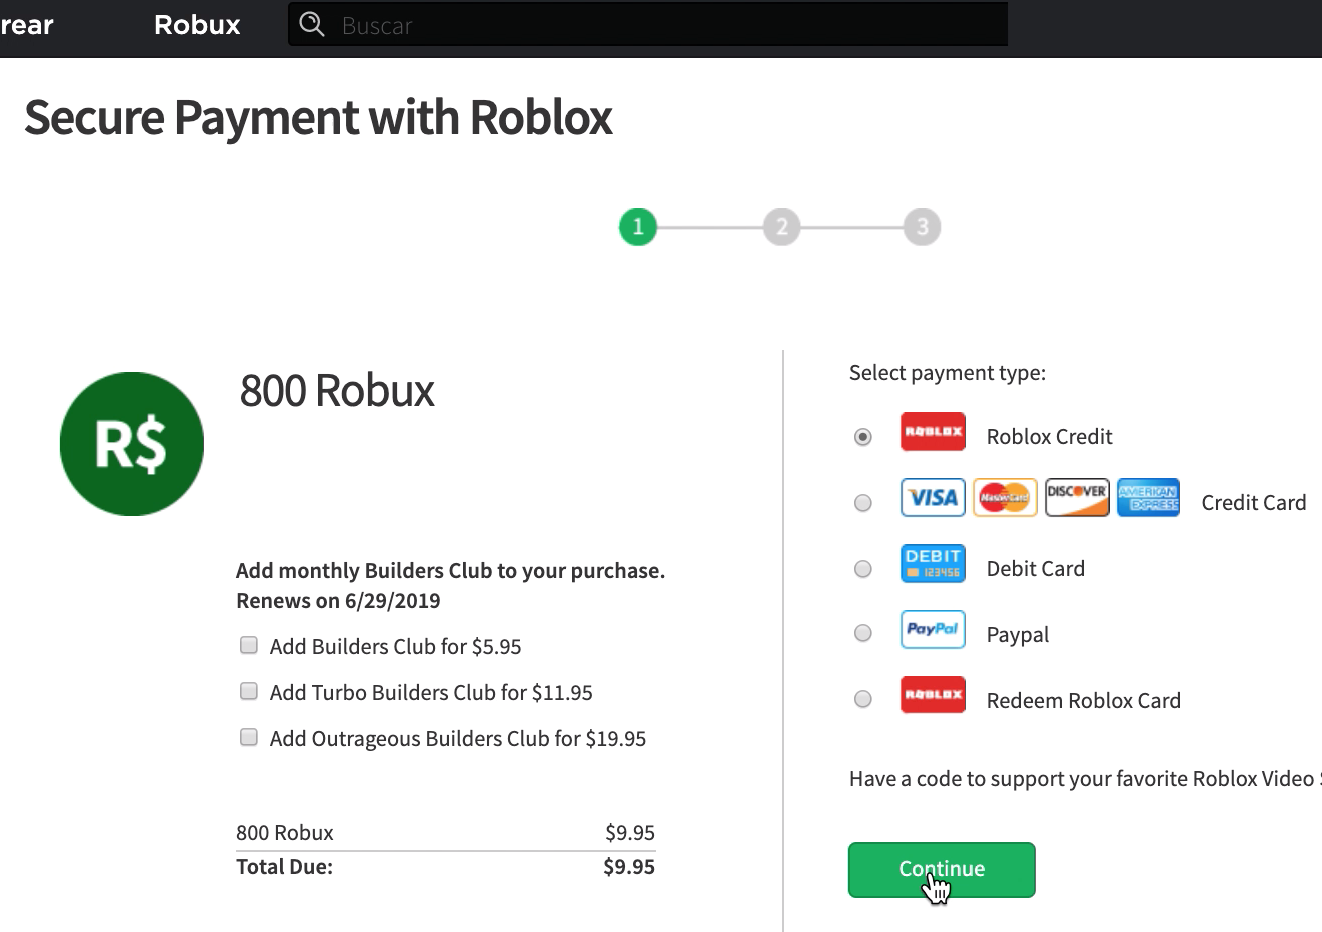 Pin Roblox Card How To Get Free Robux Codes 2019 February - roblox events 2019 dates buxgg real